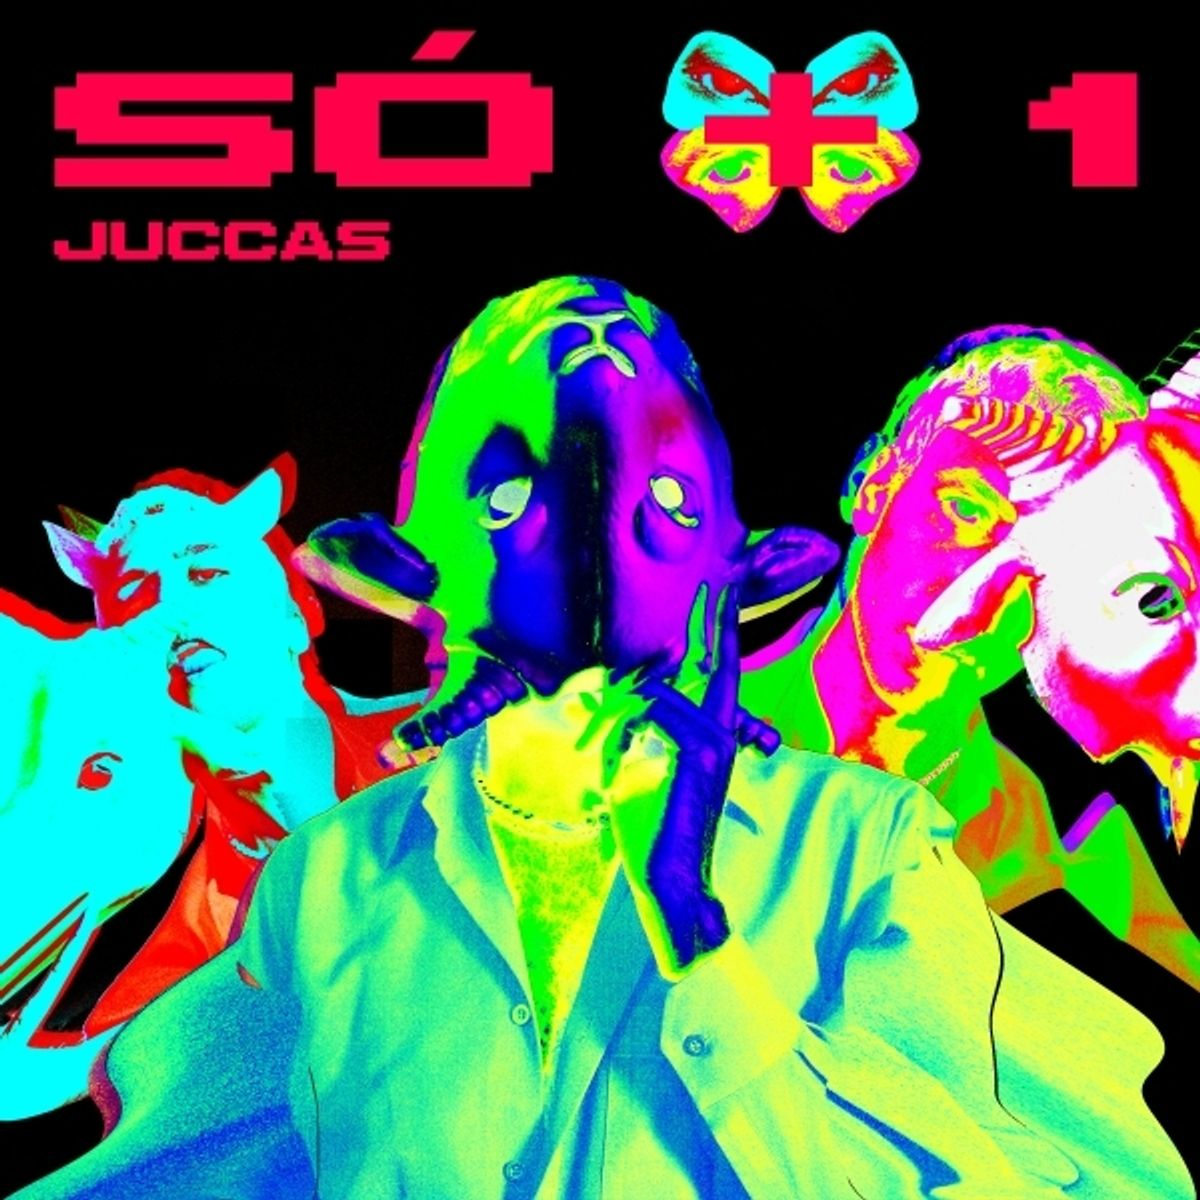 Juccas Só + 1 cover artwork